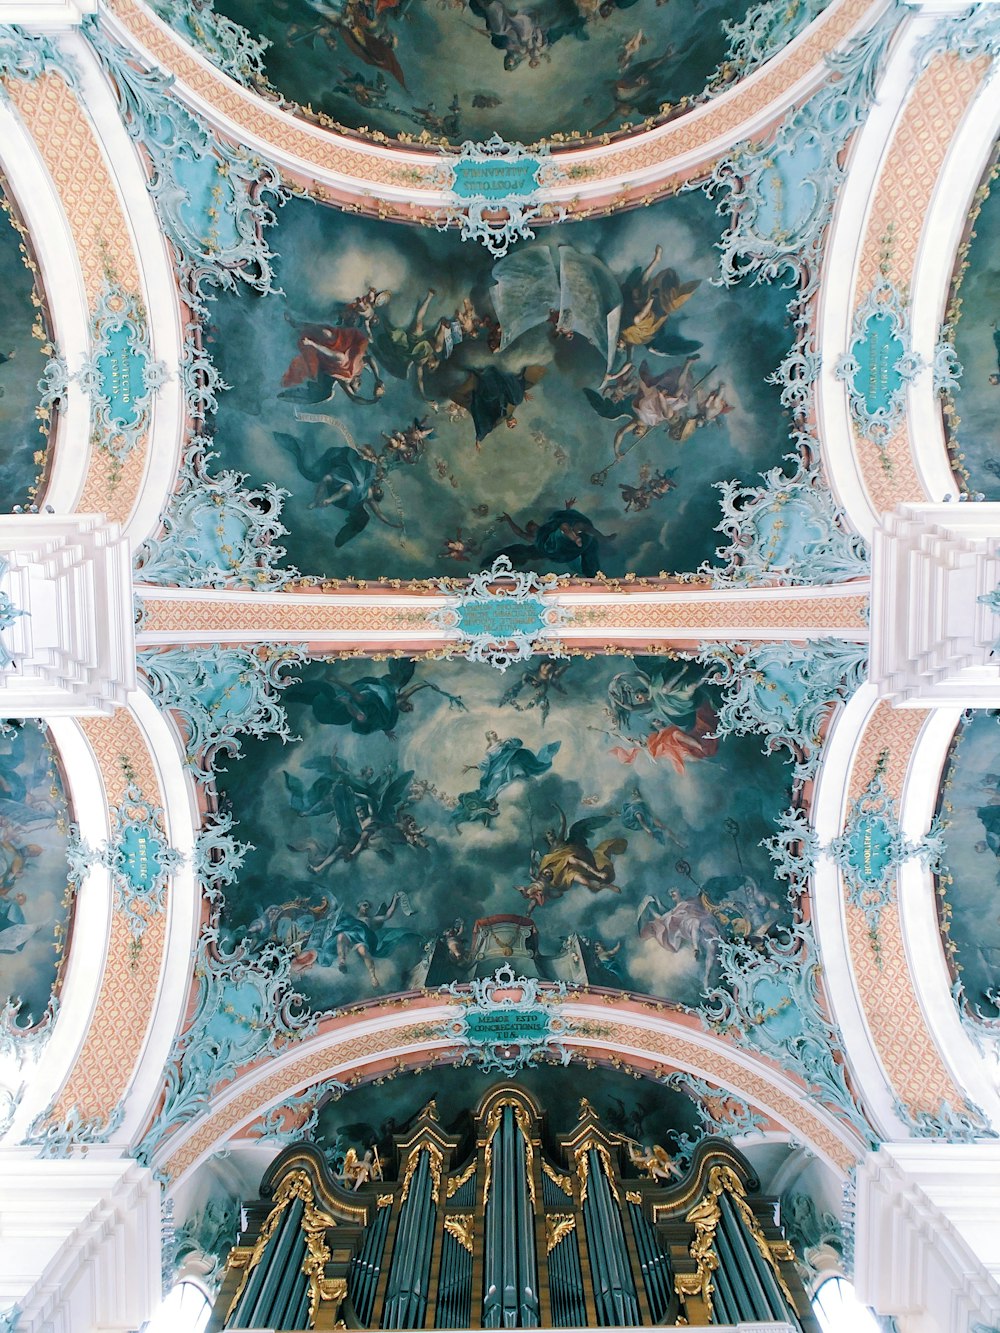 the ceiling of a church with a painting on it